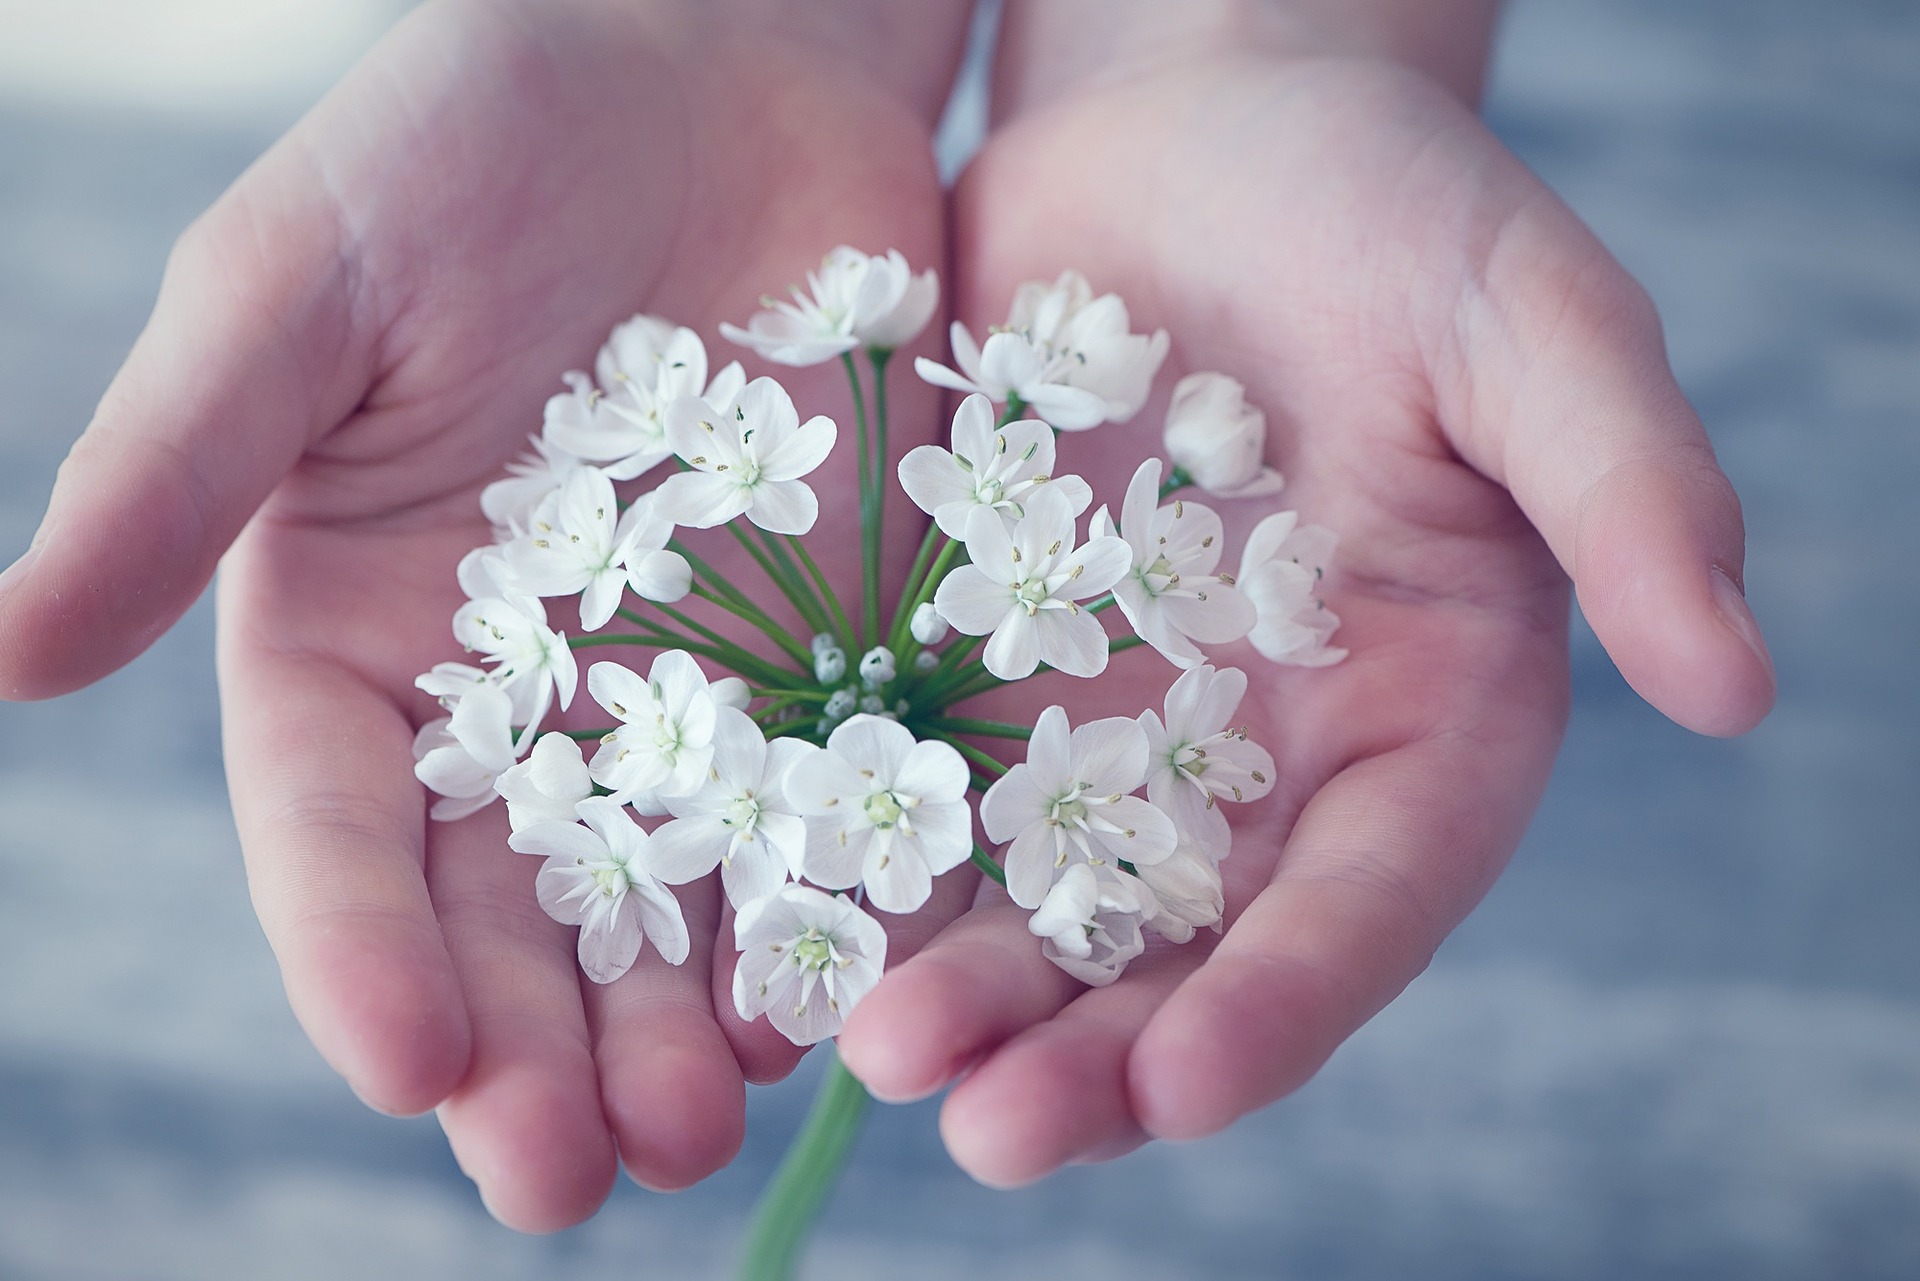 Two hands hold white flowers in the palm.